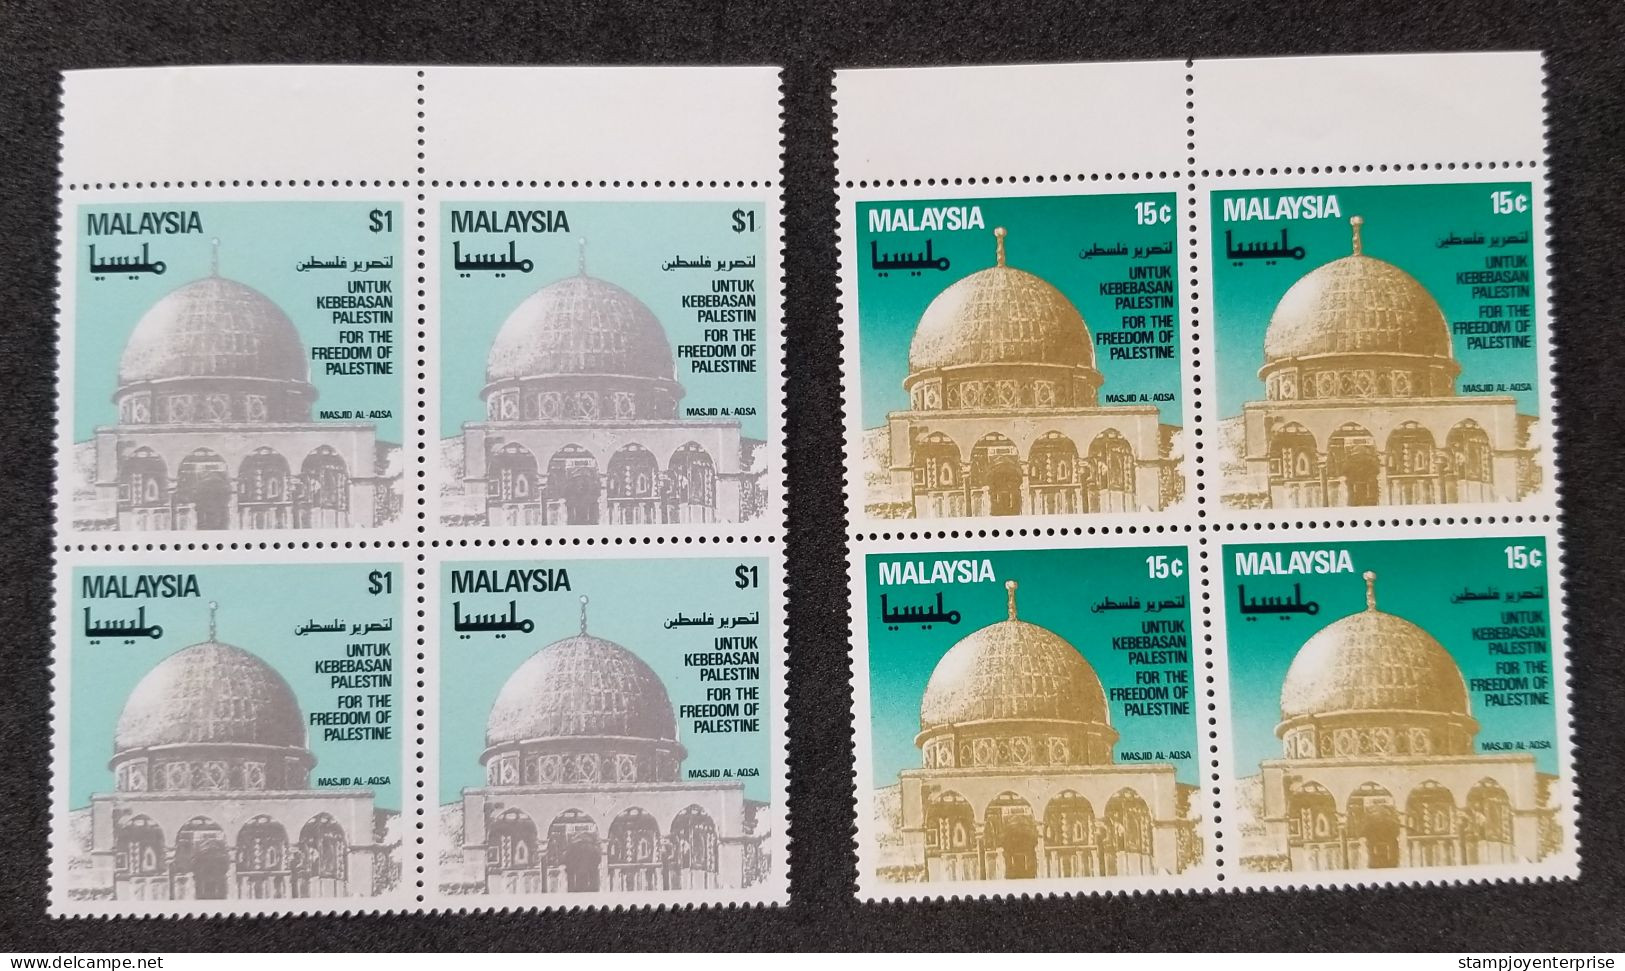 Malaysia For The Freedom Of Palestine 1982 Islamic Mosque (stamp Block Of 4) MNH - Maleisië (1964-...)